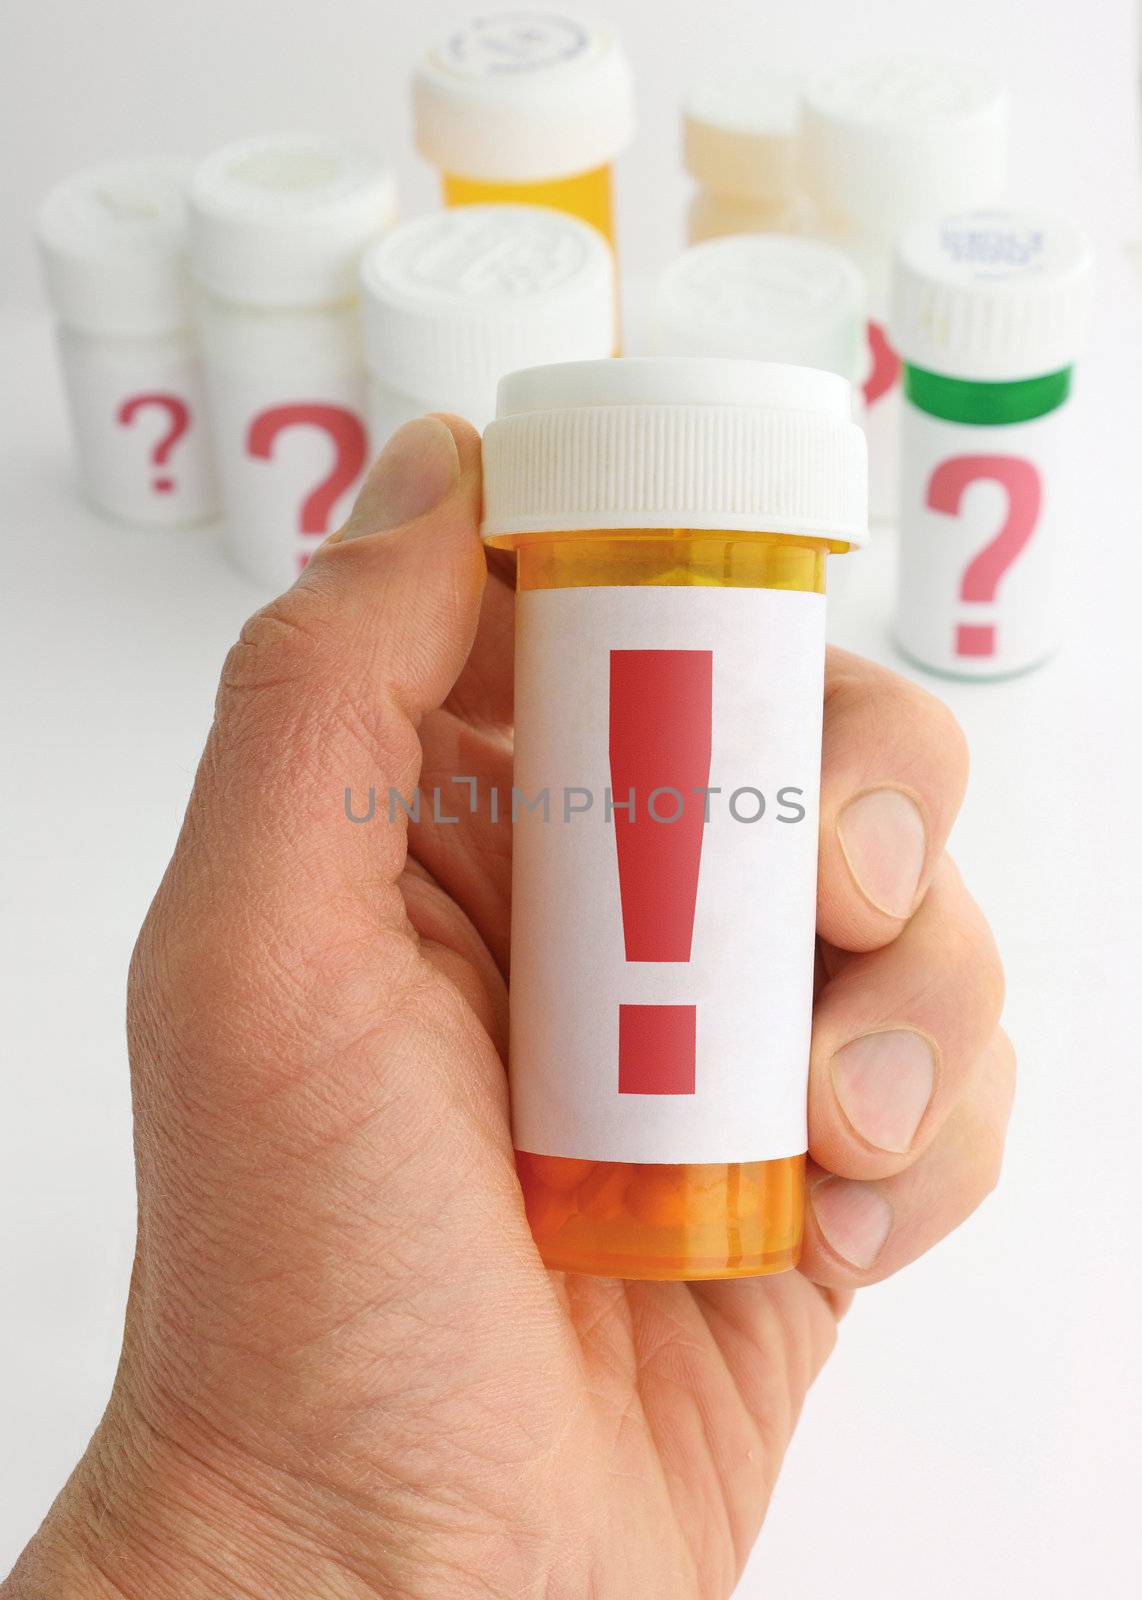 A hand holding a medicine bottle marked with a large exclamation mark. Several additional pill bottles, all labeled with large question marks, are in the background. The Image uses a shallow depth of field and background is moderately out of focus.